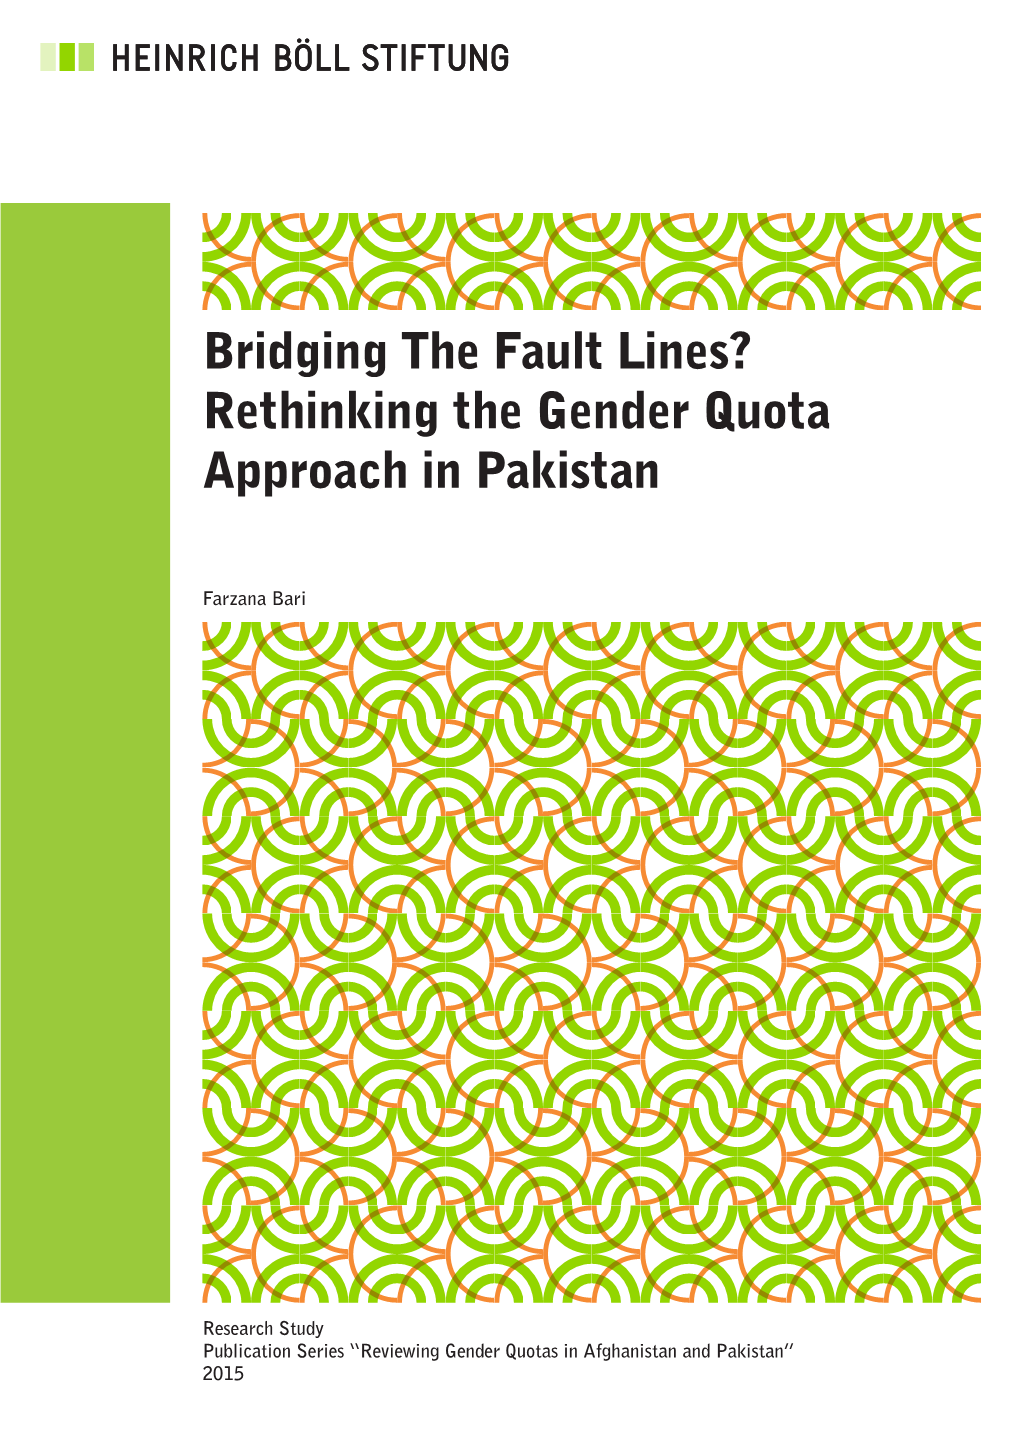 Bridging the Fault Lines? Rethinking the Gender Quota Approach in Pakistan